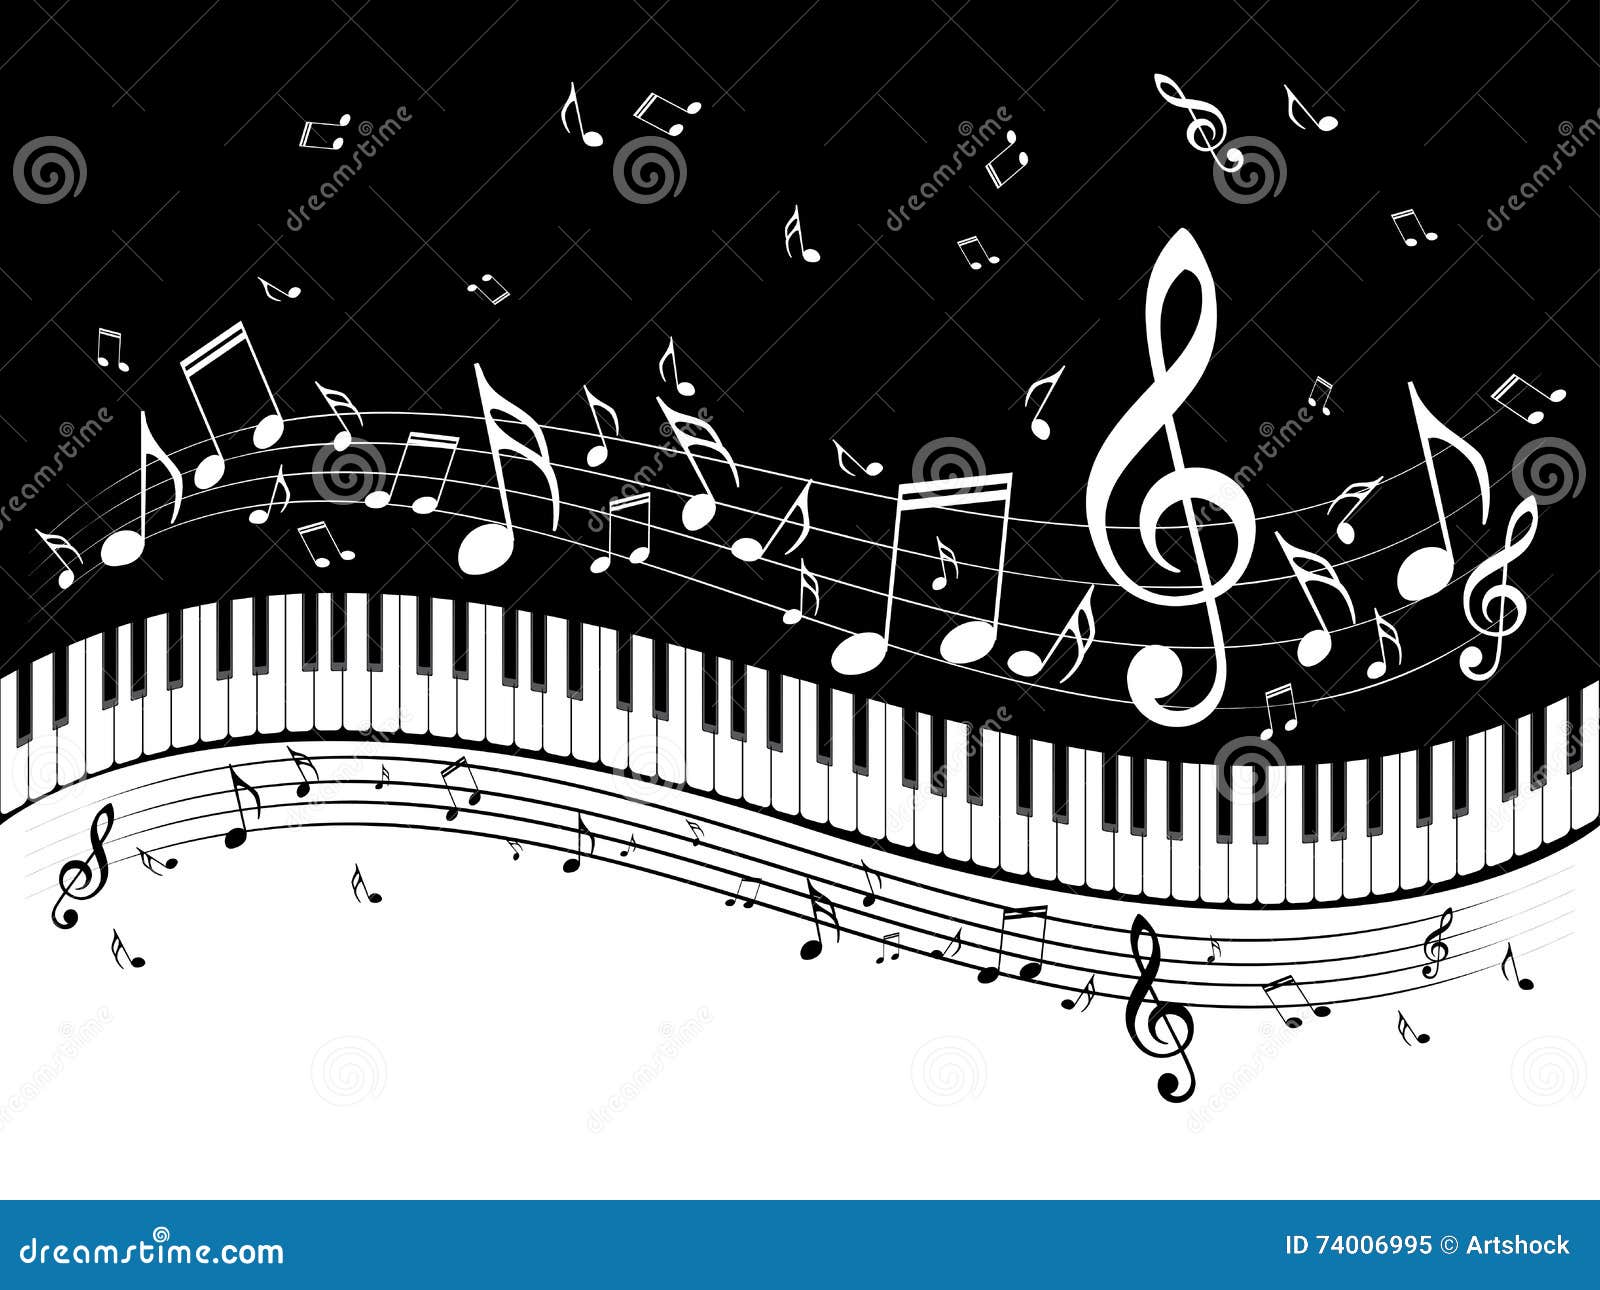 Piano Keyboard With Music Notes Stock Vector Illustration Of Synth